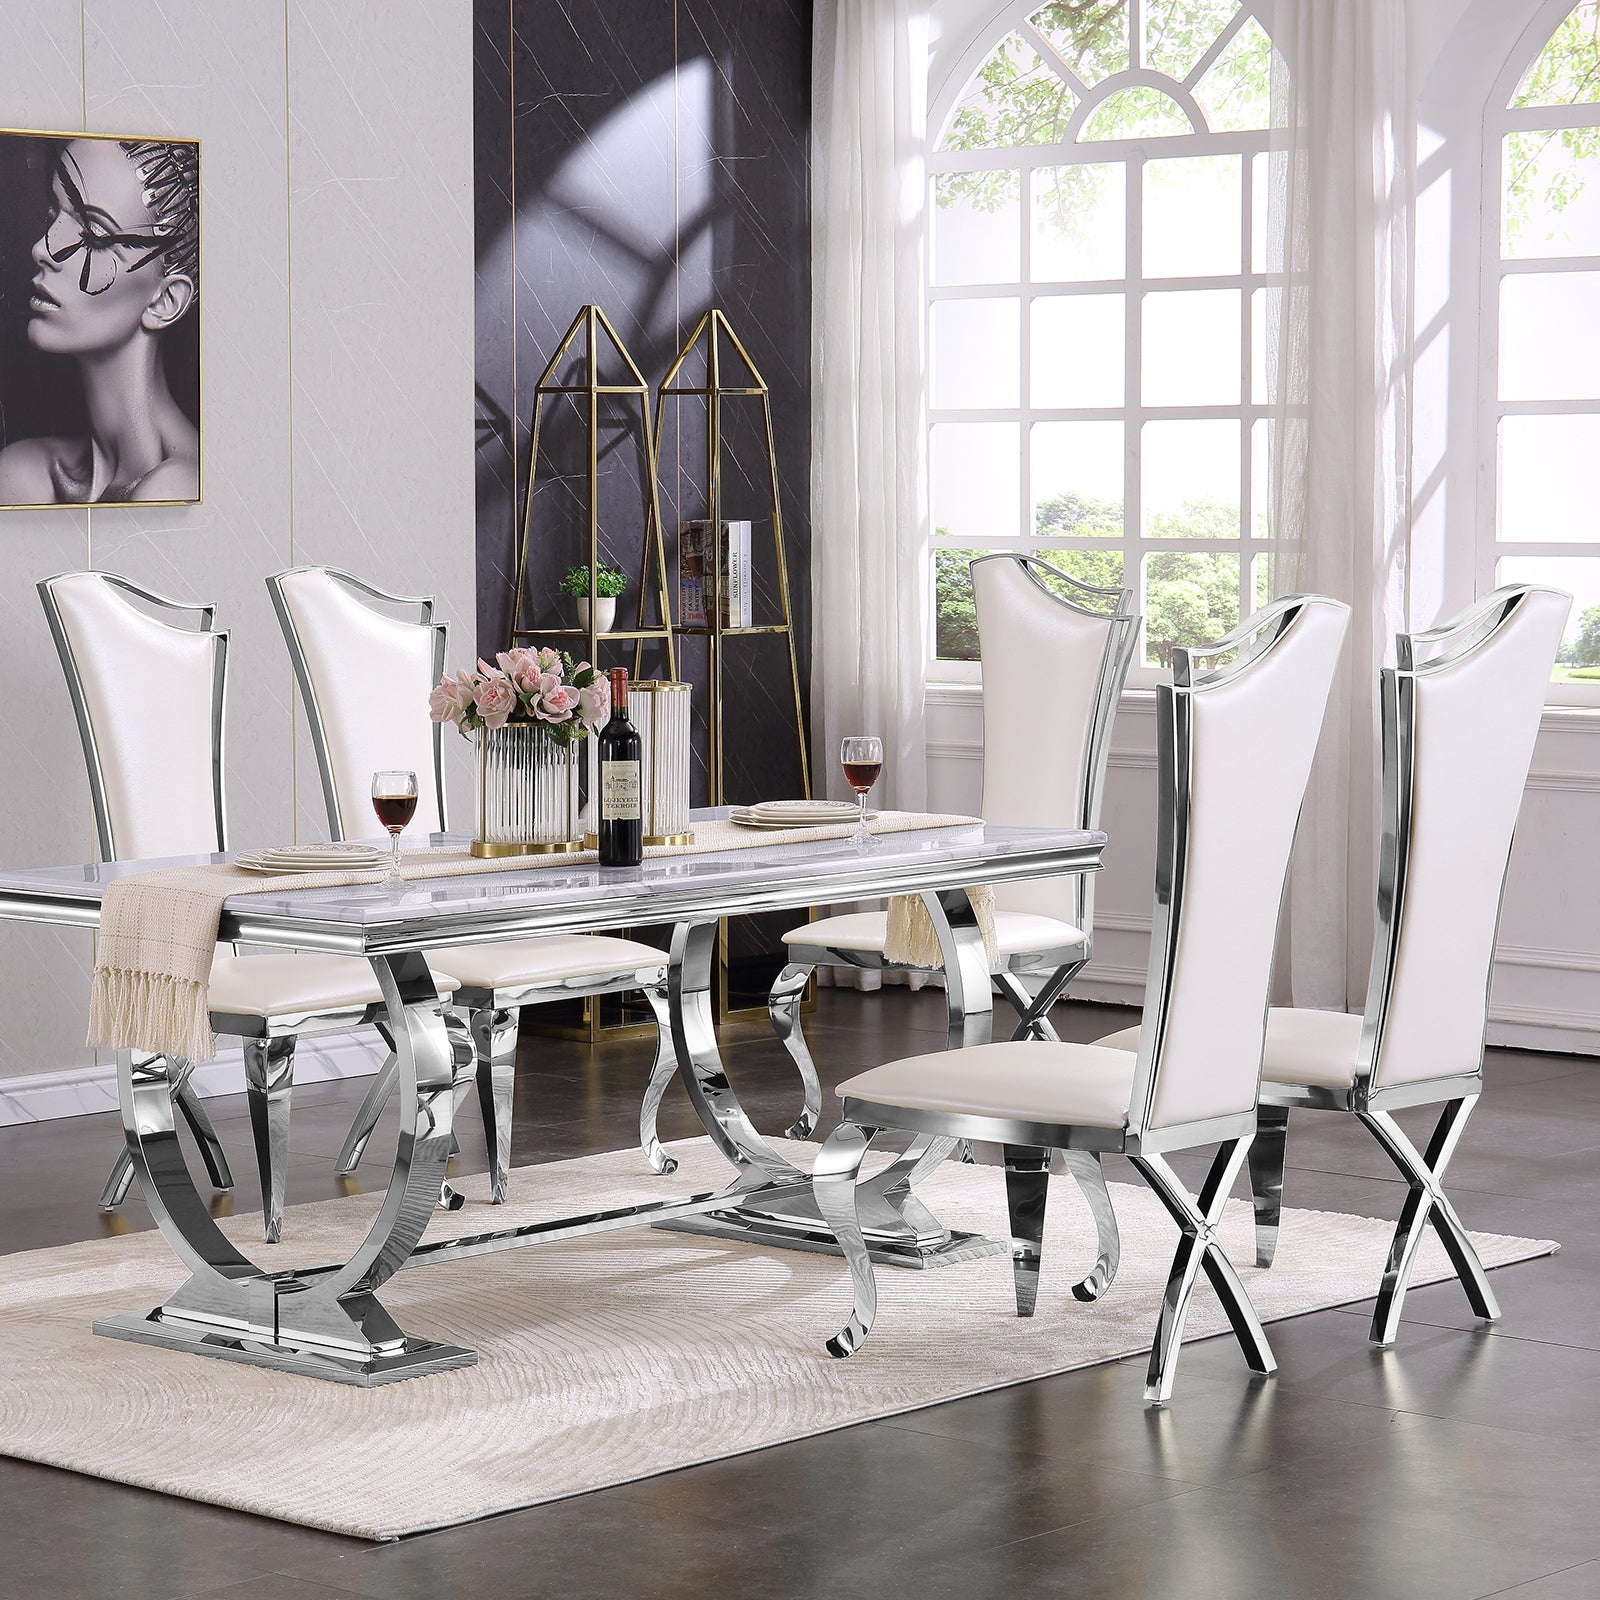 White leather  Dining Chairs | Streamlined High backrest | Silver Metal Legs | C165